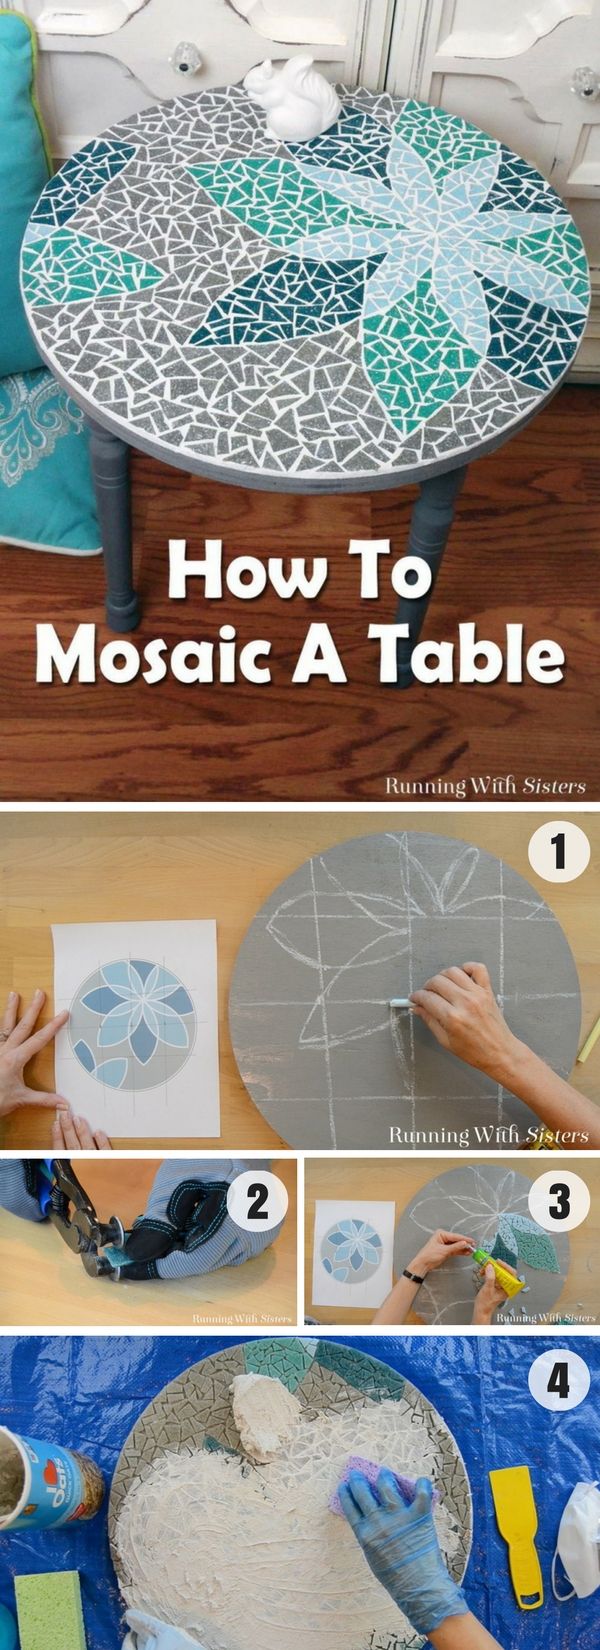 DIY Mosaic Table -   Awesome Mosaic Tables Ideas